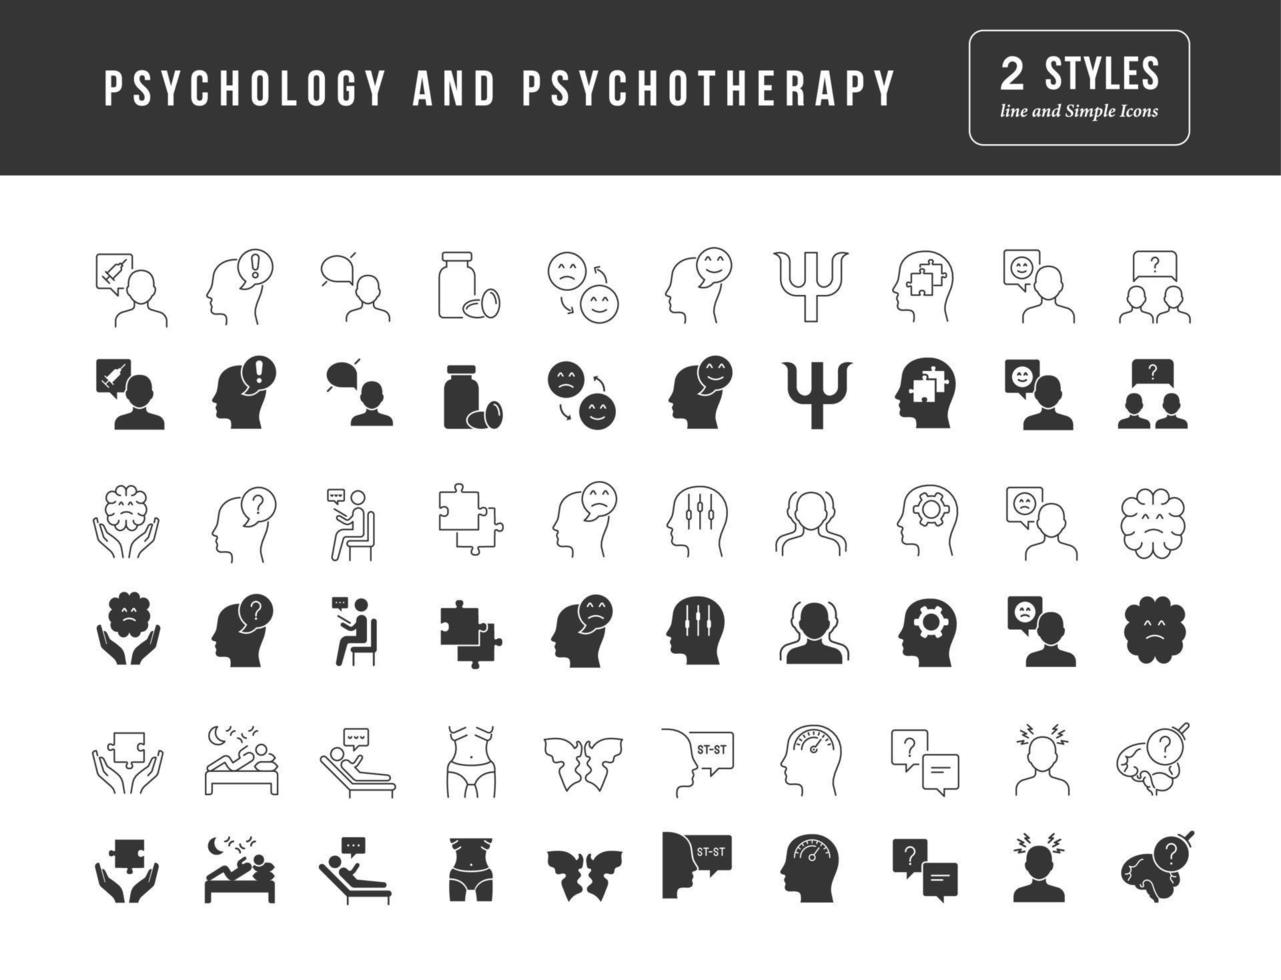 Set of simple icons of Psychology and Psychotherapy vector